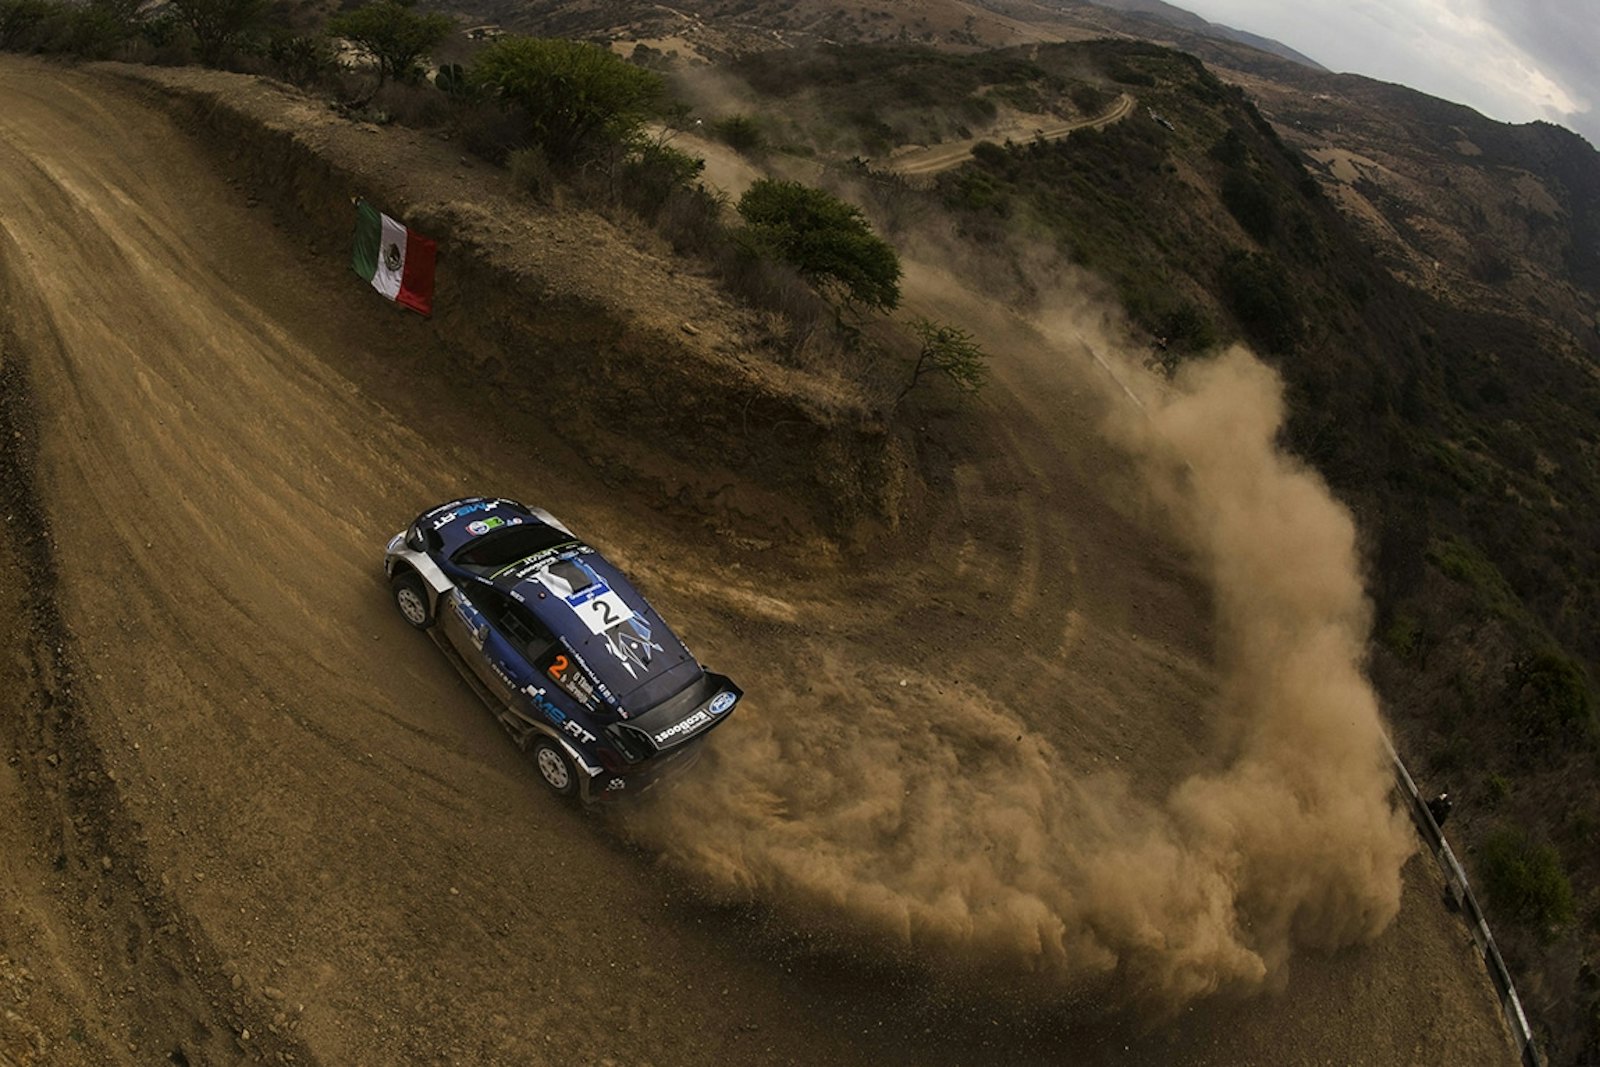 Ott Tanak (EST) performs during the FIA World Rally Championship 2017 in Leon, Mexico on March 11, 2017 // Jaanus Ree/Red Bull Content Pool // P-20170312-00111 // Usage for editorial use only // Please go to www.redbullcontentpool.com for further information. //